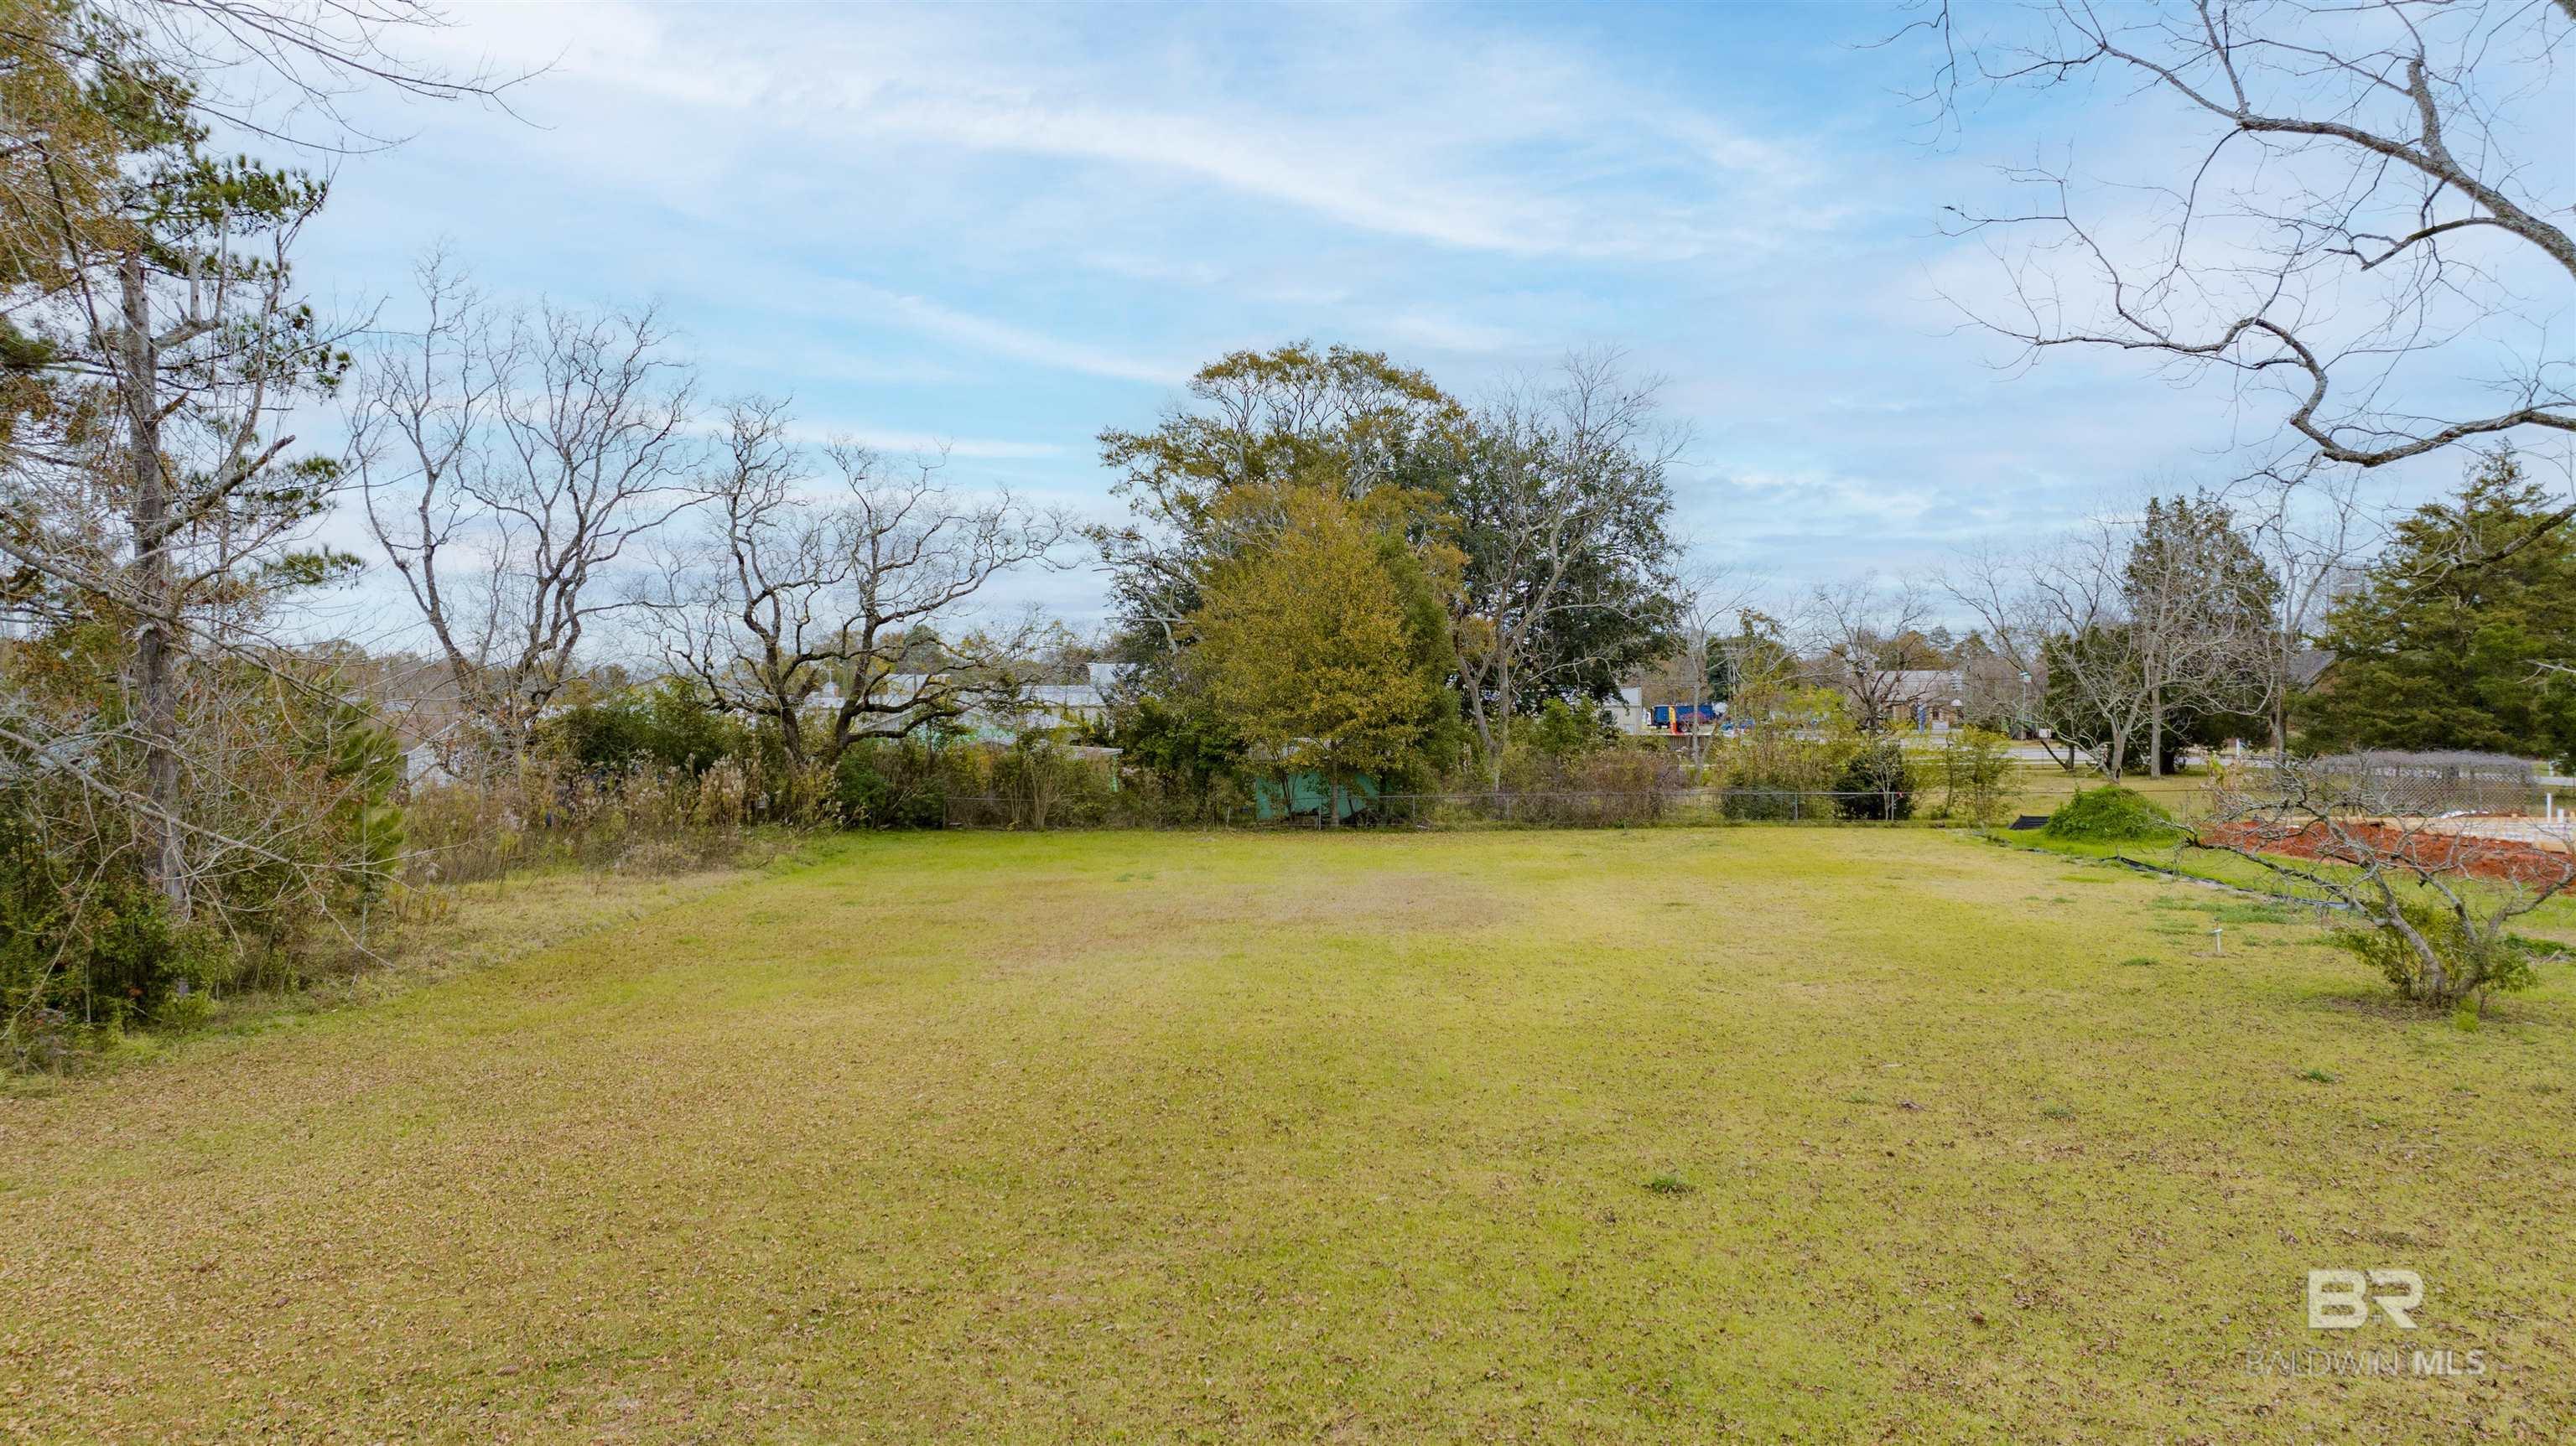 Wonderful building lot just waiting for you to build your dream home! This is a rare find with almost a half acre and level. It is already cleared and easily accessible. Fantastic location close to shopping, schools, Baldwin Beach Express and I-10. Enjoy the white sand beaches and the Gulf of Mexico less than 45 minutes away!